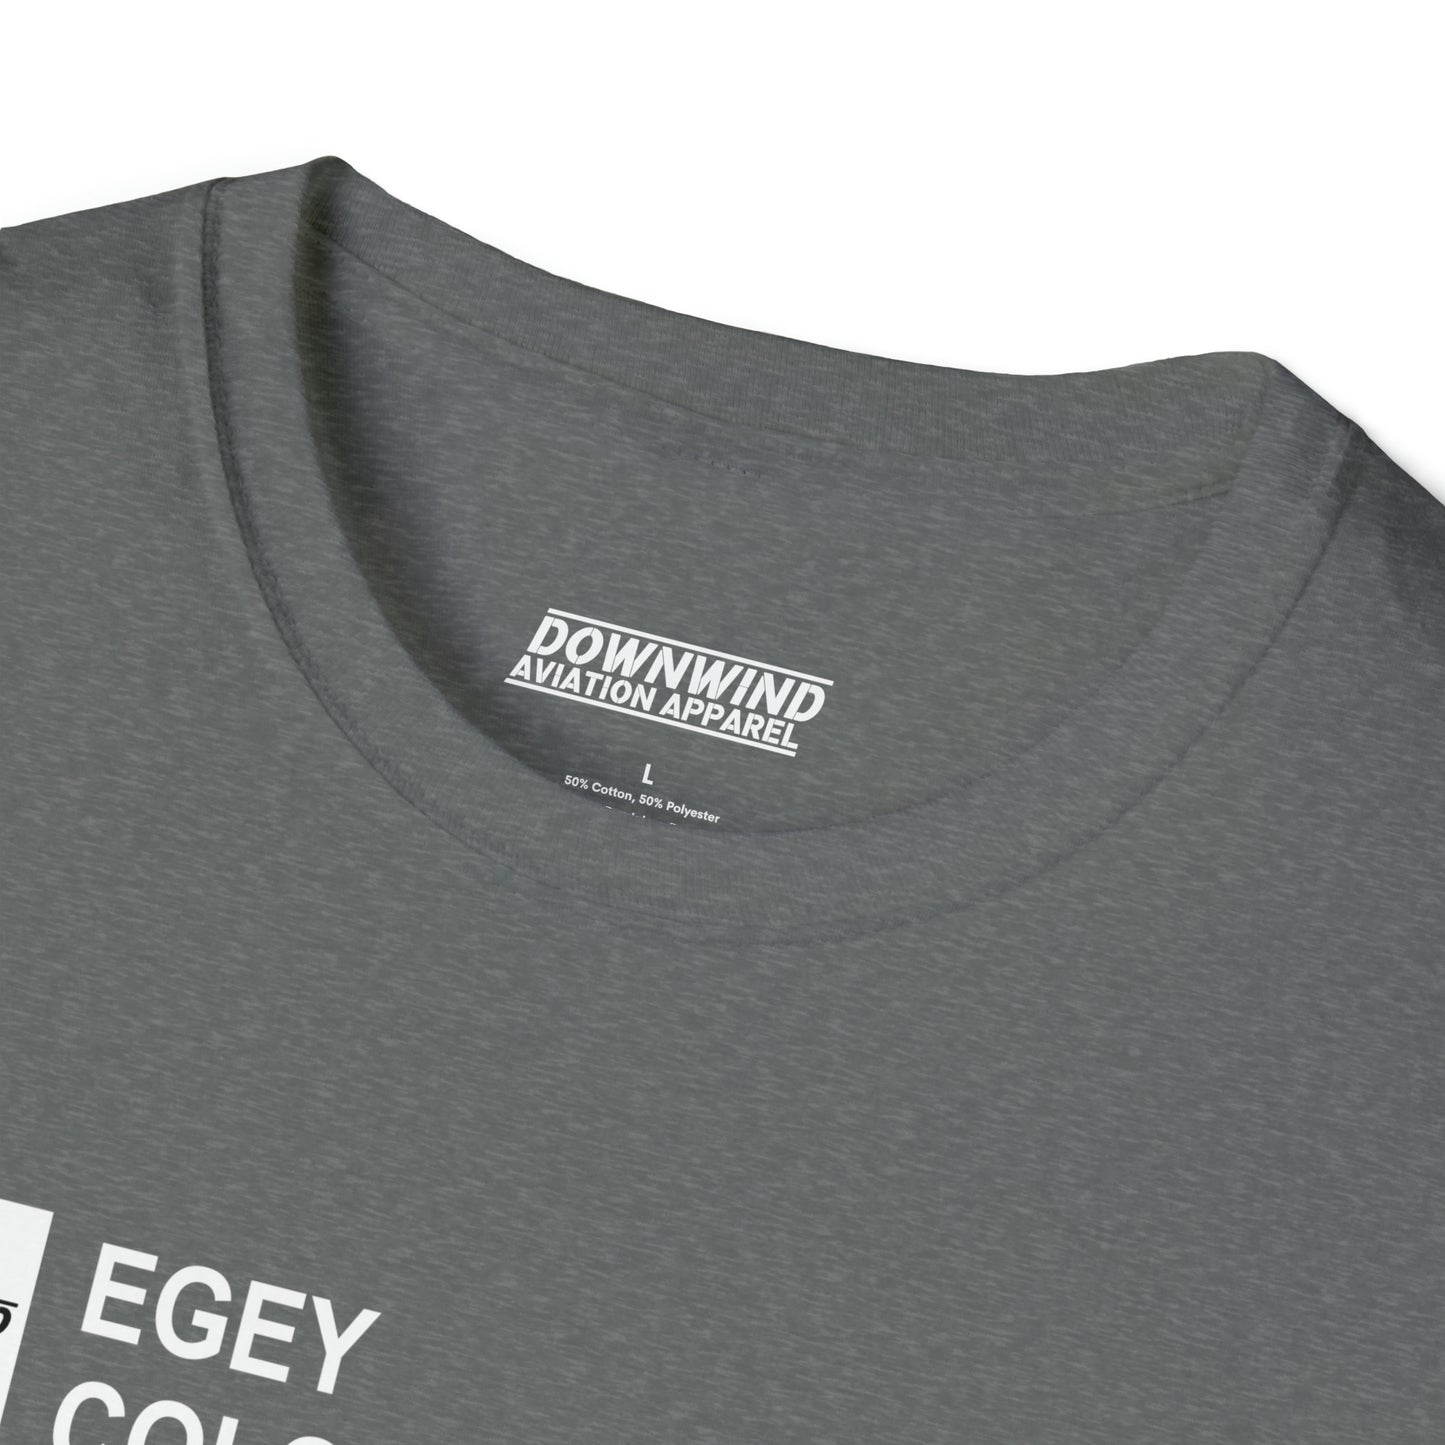 EGEY / Colonsay Airport T-Shirt